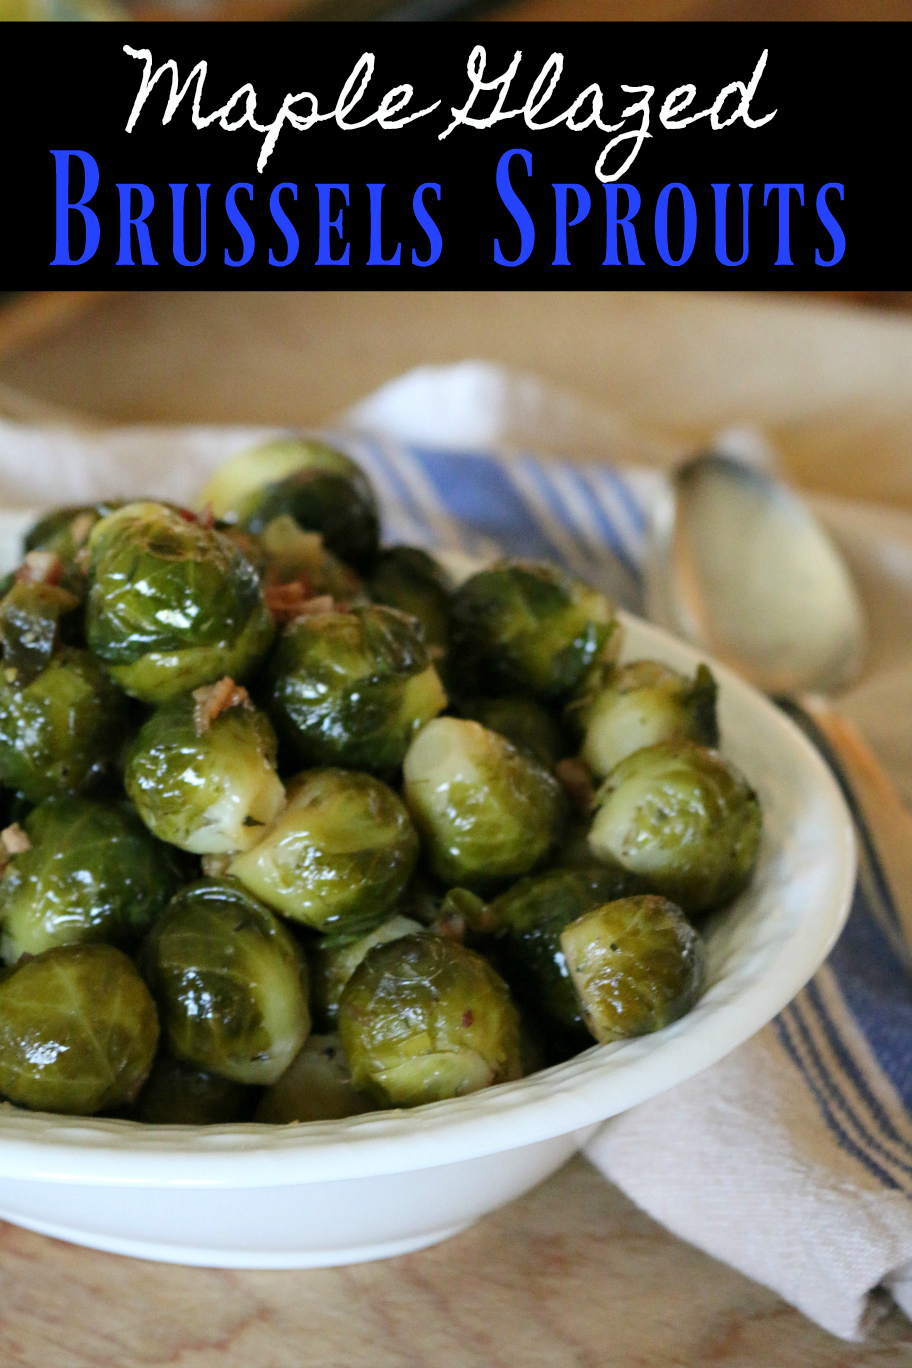 A Maple Glazed Brussels Sprouts Holiday Recipe CeceliasGoodStuff.com Good Food For Good People